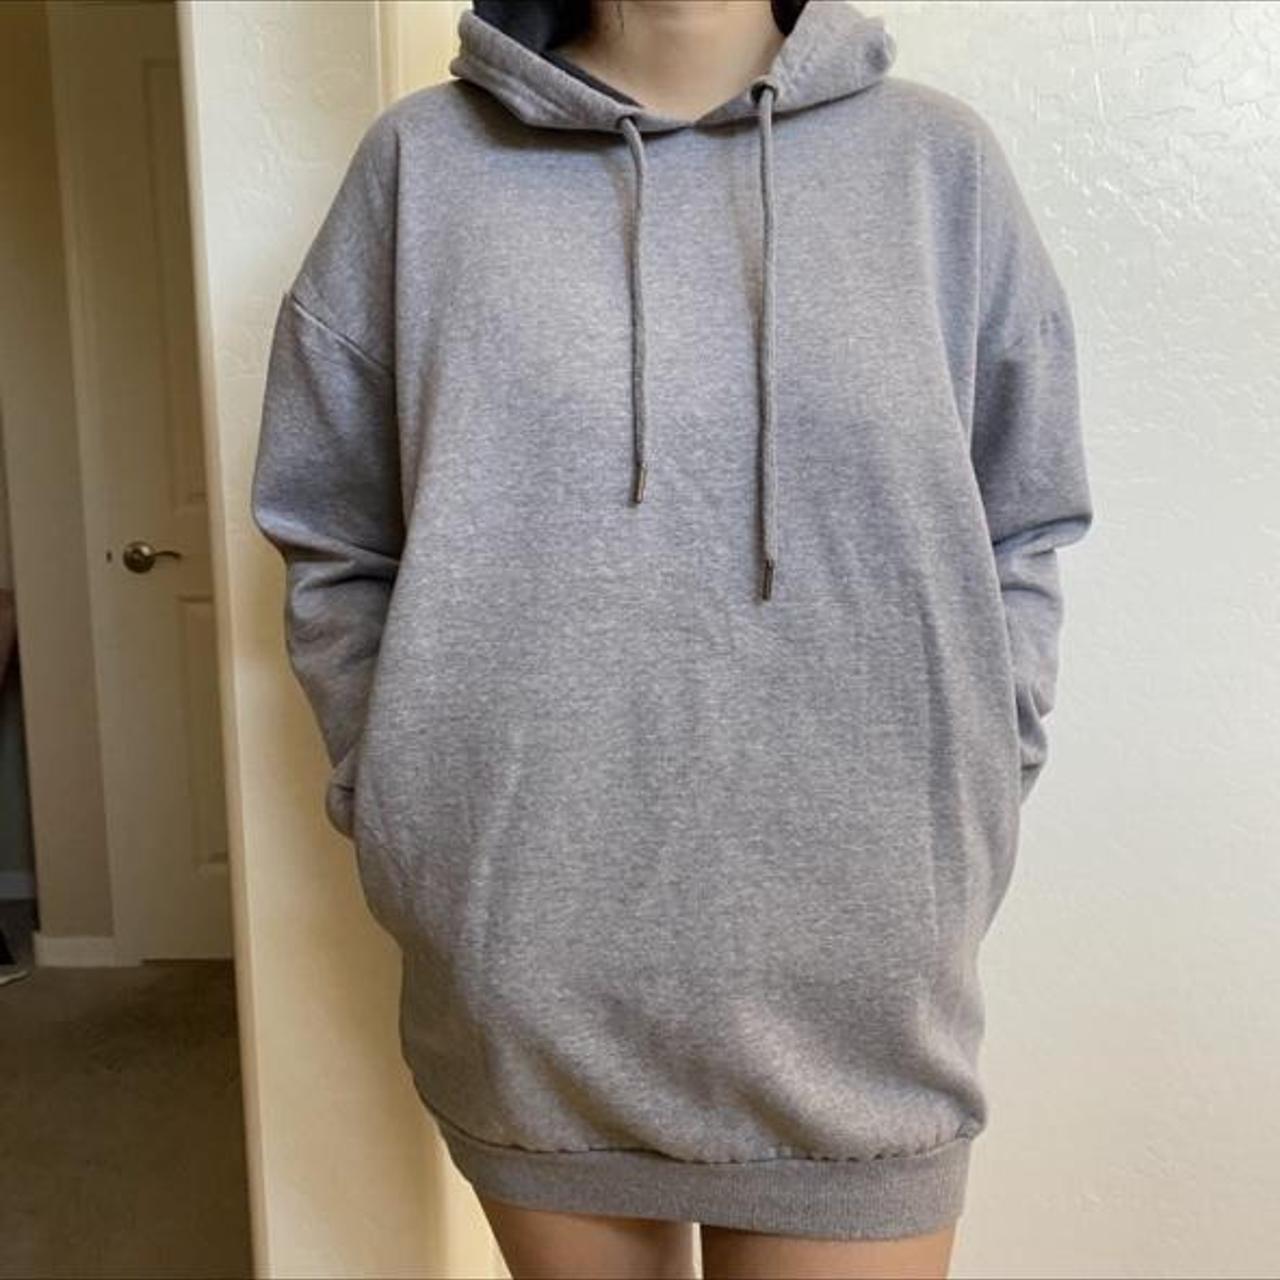 Product Image 1 - oversized grey hoodie dress

tag says